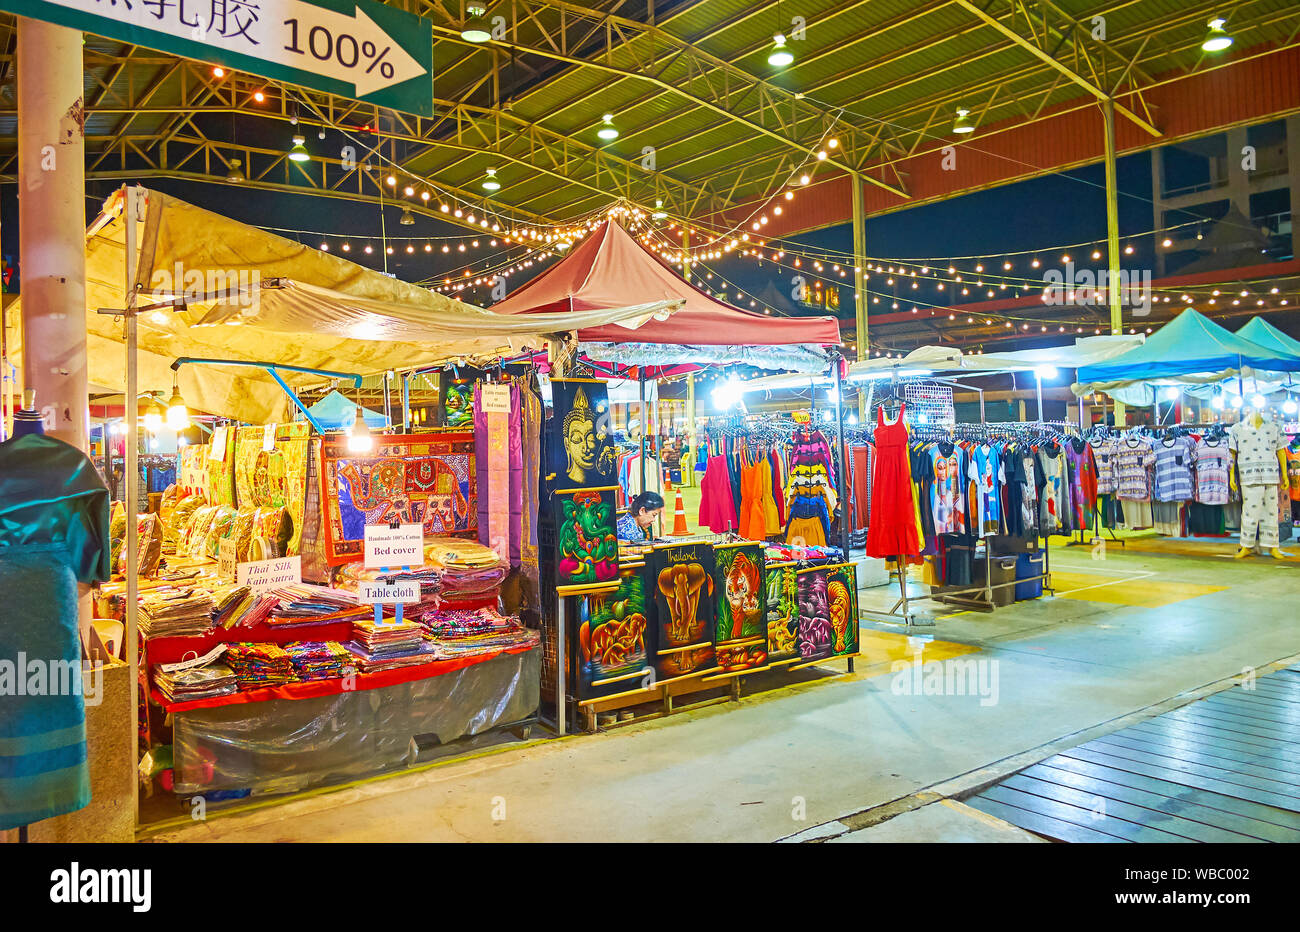 CHIANG MAI, THAILAND - MAY 2, 2019: The garment stalls and tents of Kalare Night Market, located in large pavilion, on May 2 in Chiang Mai Stock Photo